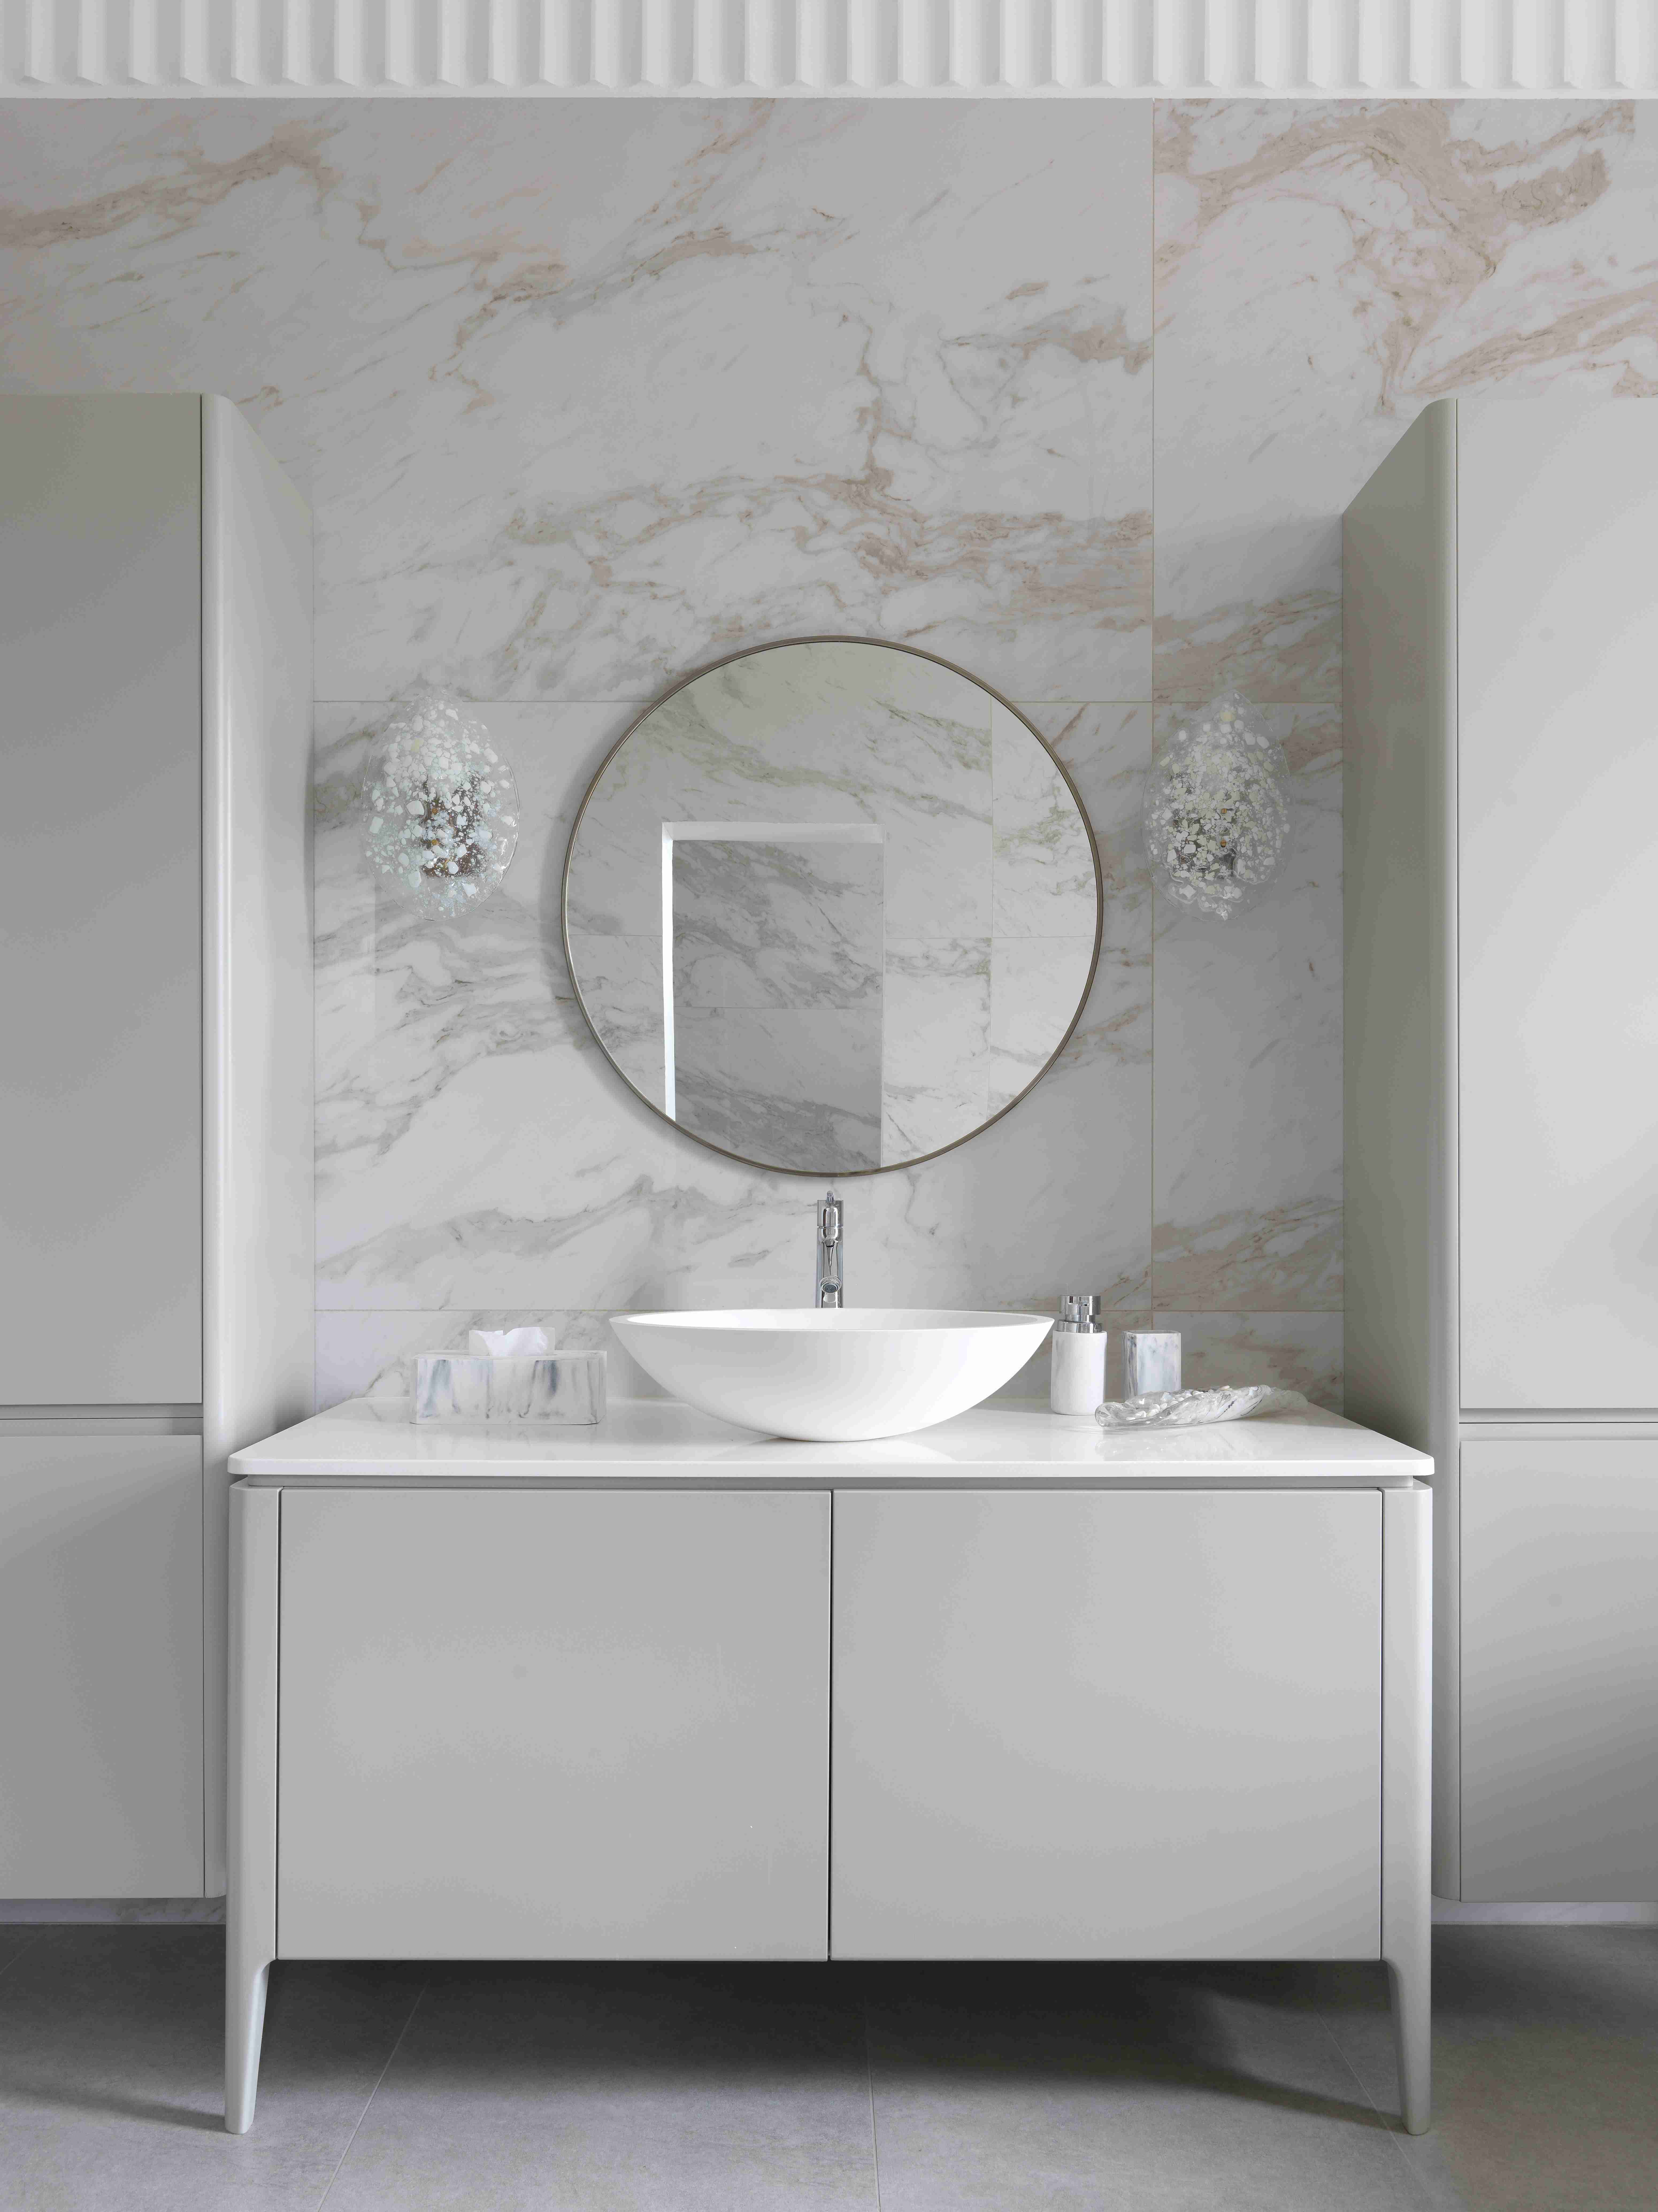 A modern white vanity with circular mirror and round basin.